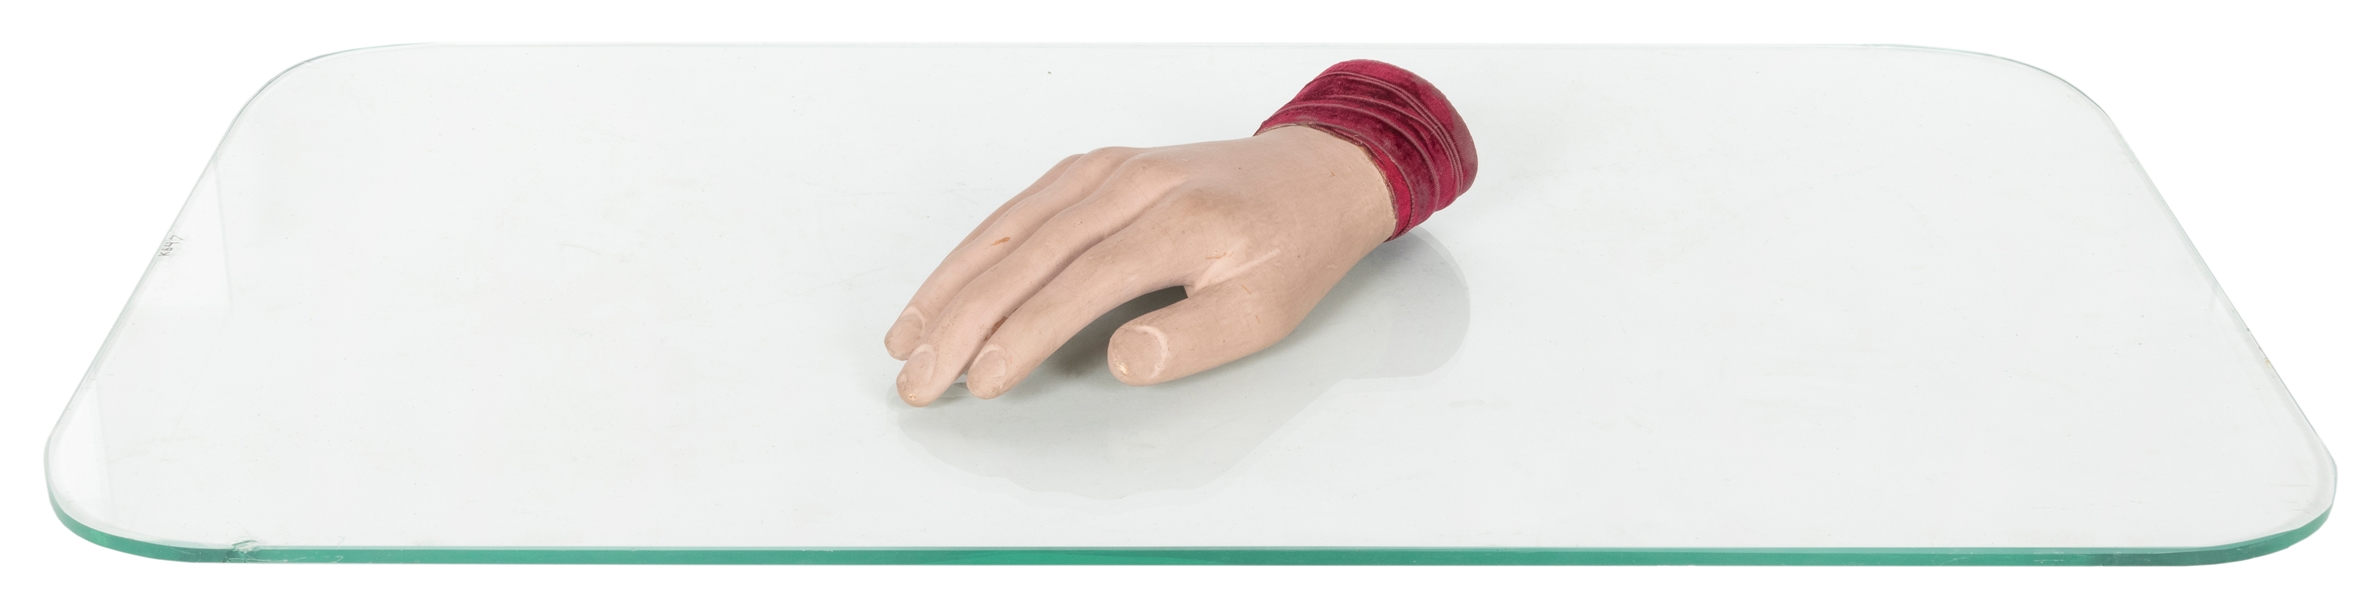  Rapping Hand. Circa 1920. A disembodied wooden hand with ve...